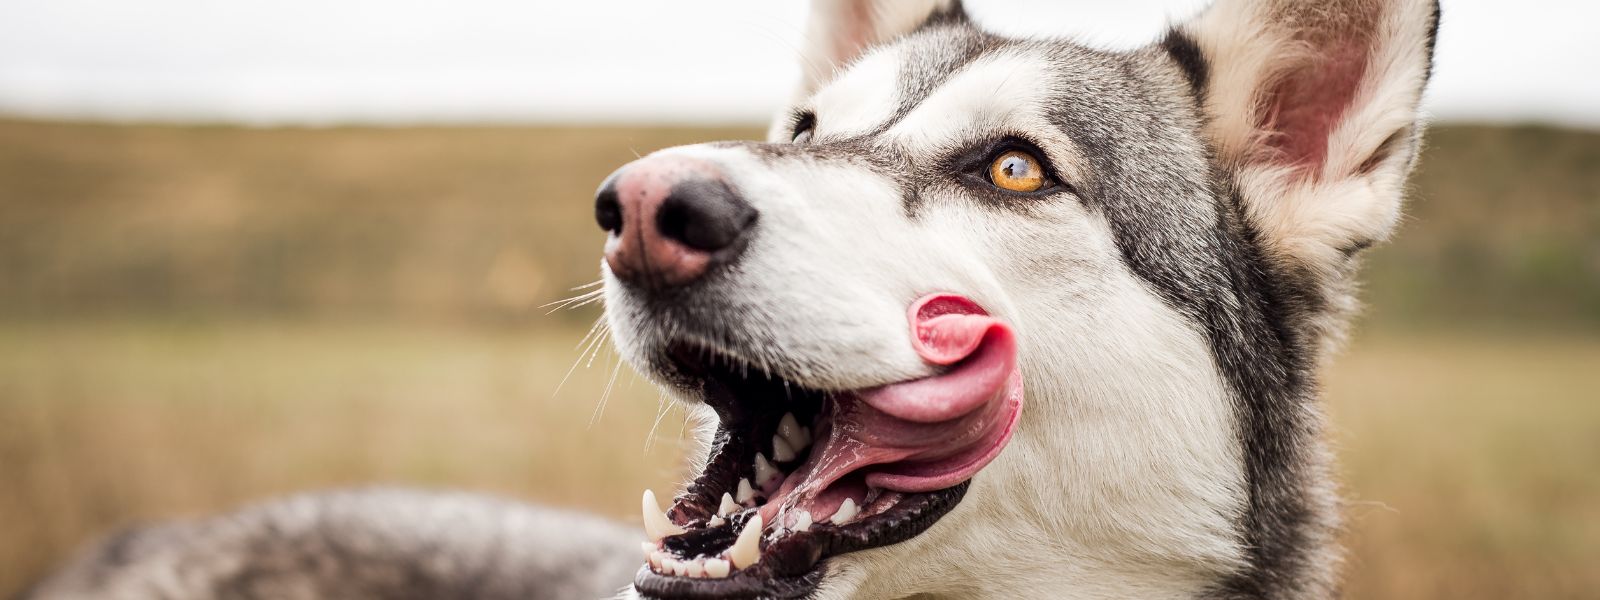 Can dogs eat insect protein?